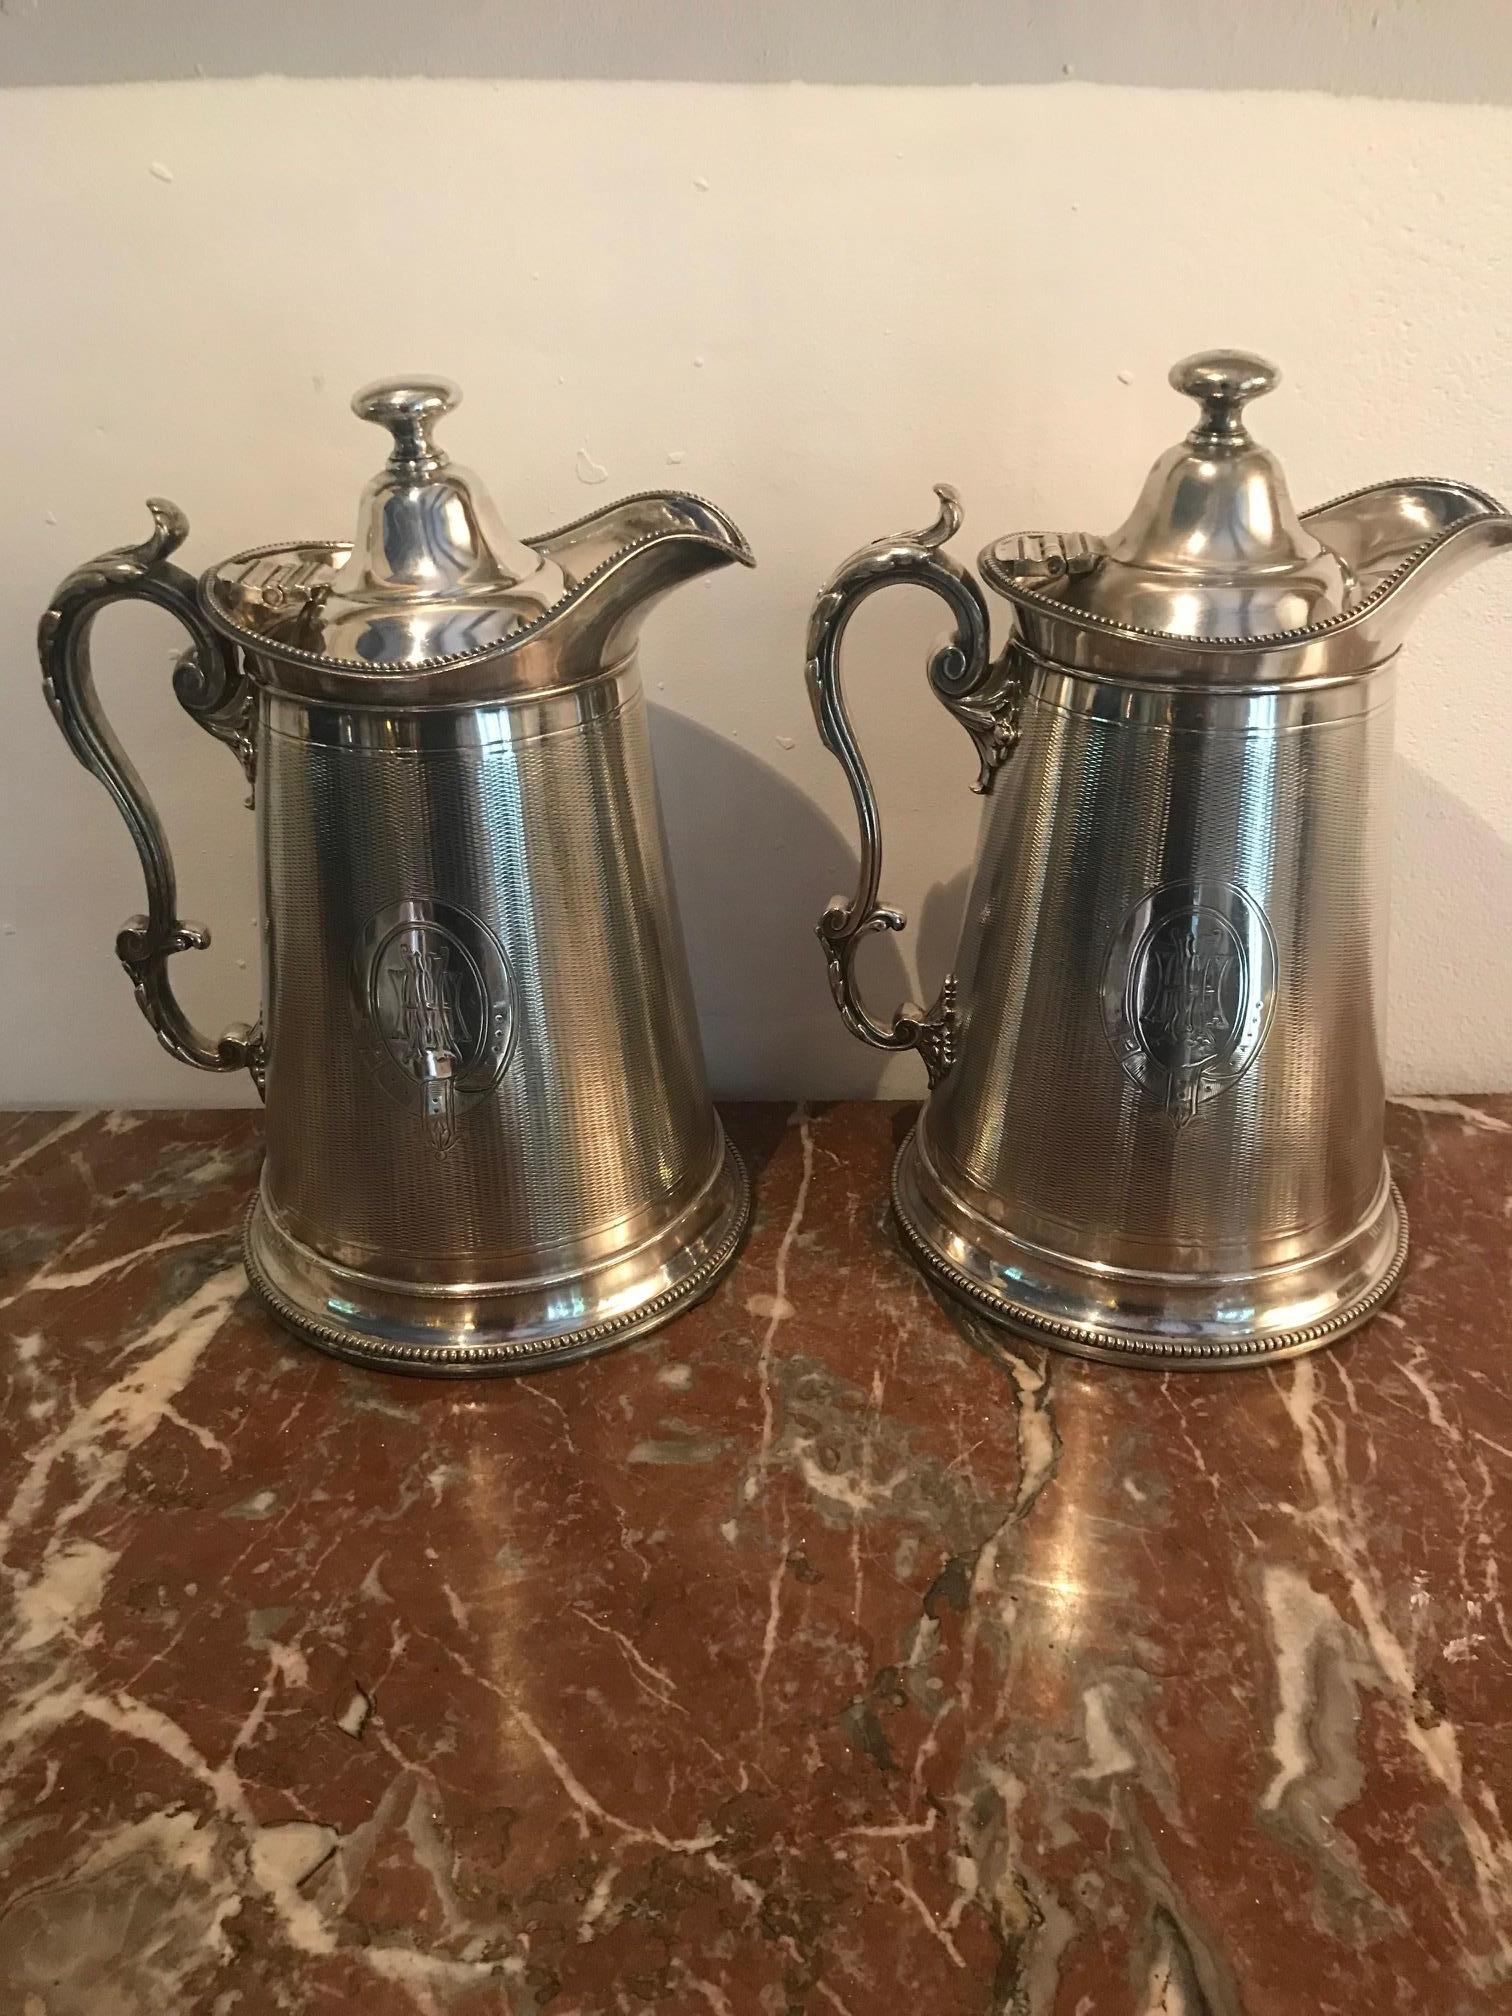 A wonderful pair of silver plate water jugs/ pitchers by Carringtons of Regent Street London. Showing delicate, detailed engraving.